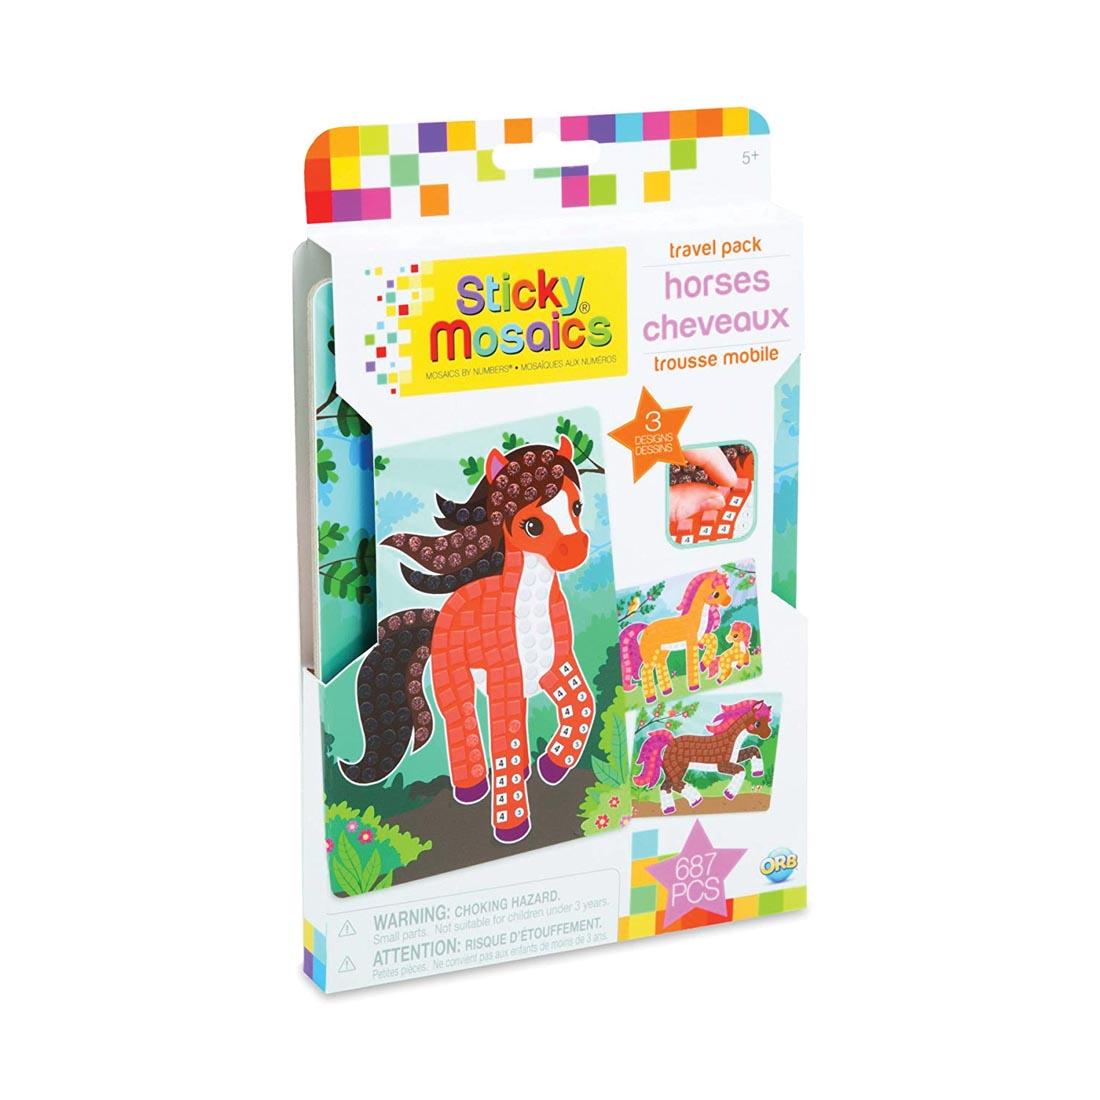 box of adhesive-backed foam mosaic crafts, featuring 3 different horse designs